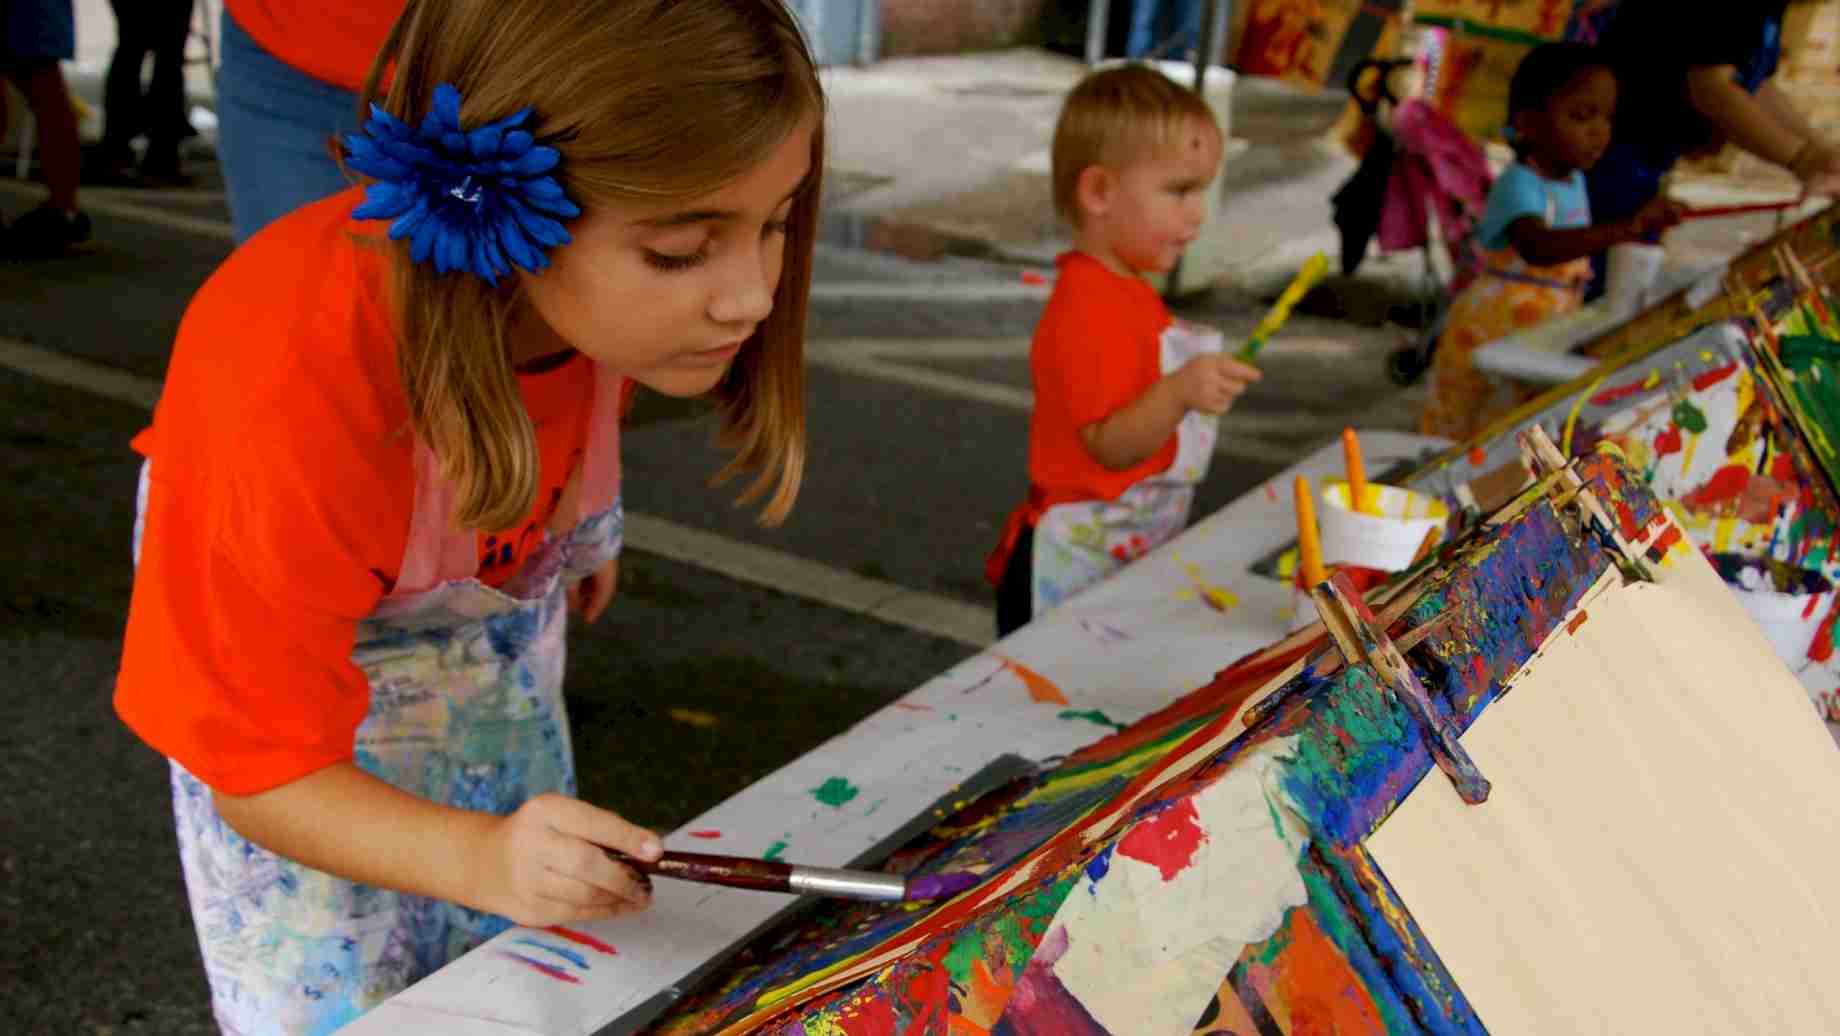 The painting easels are always a popular activity area at the annual Imagination Station sponsored by the UF Art Education program each Fall.